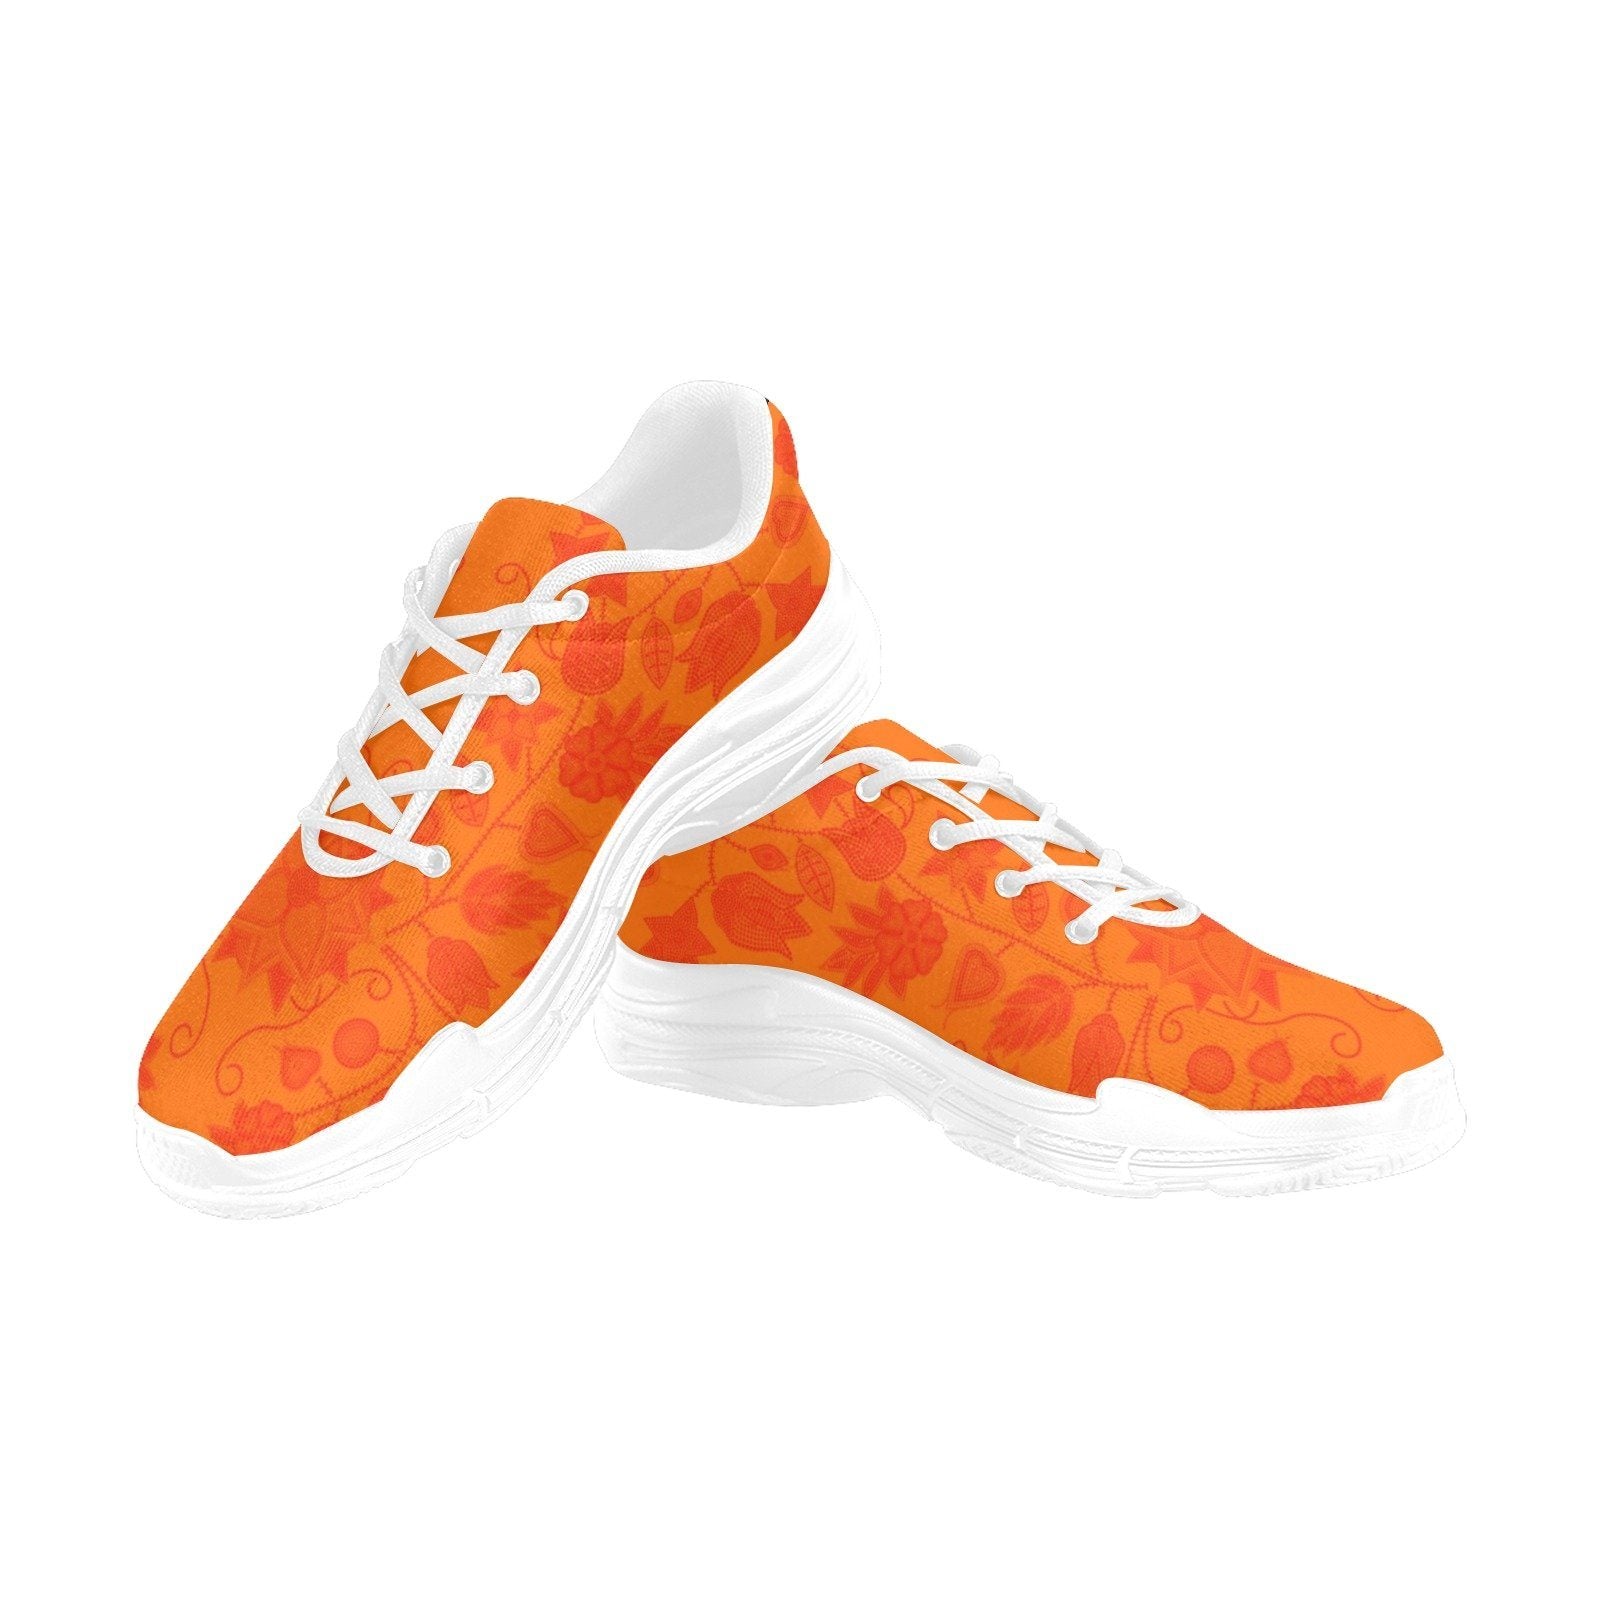 Floral Beadwork Real Orange Chunky Men's Running Shoes Artsadd US5 White Sole 